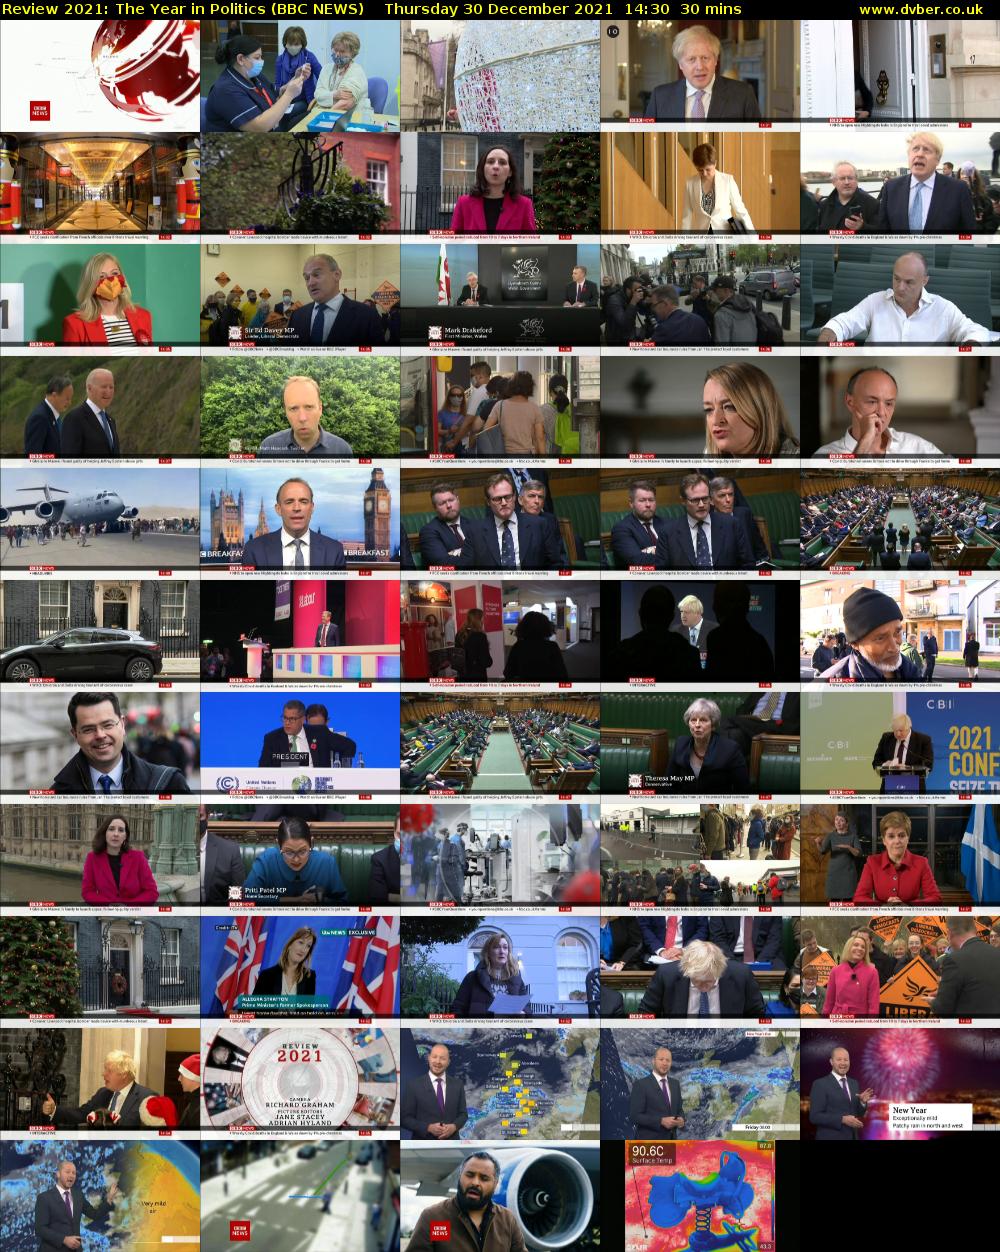 Review 2021: The Year in Politics (BBC NEWS) Thursday 30 December 2021 14:30 - 15:00